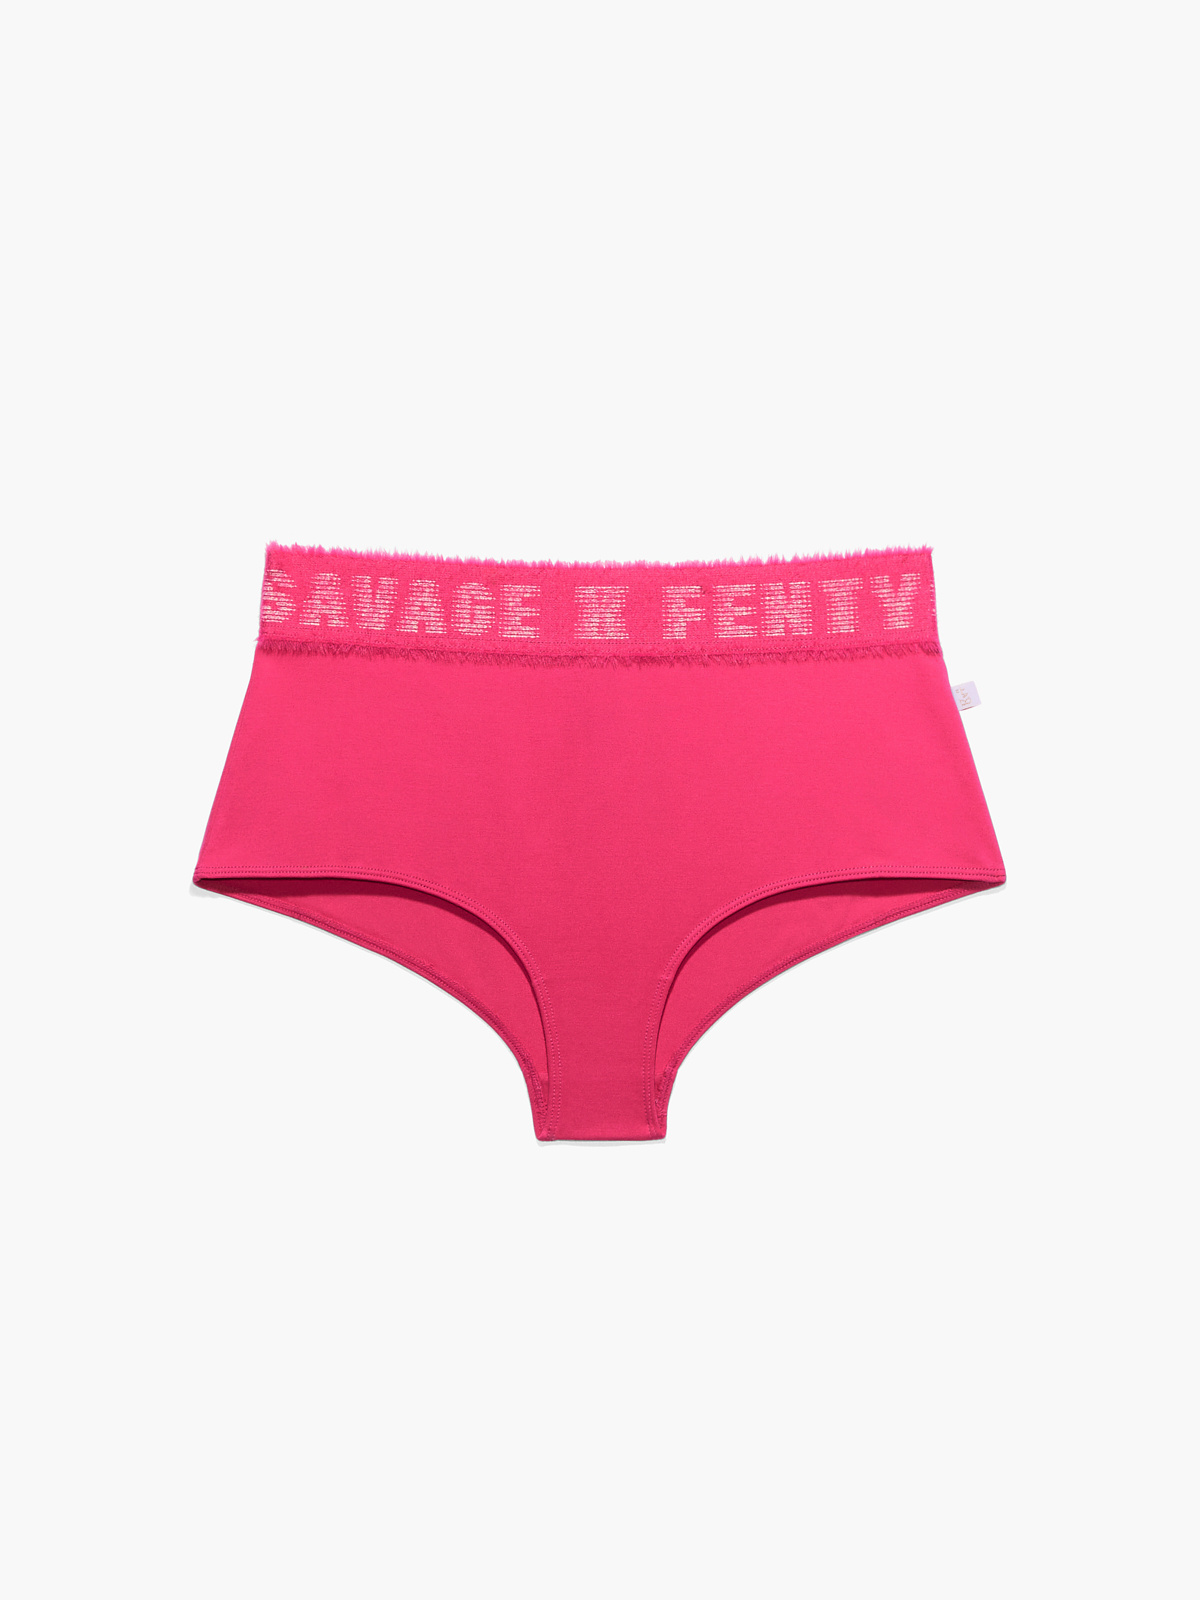 CLF Forever Savage Cheeky Booty Short